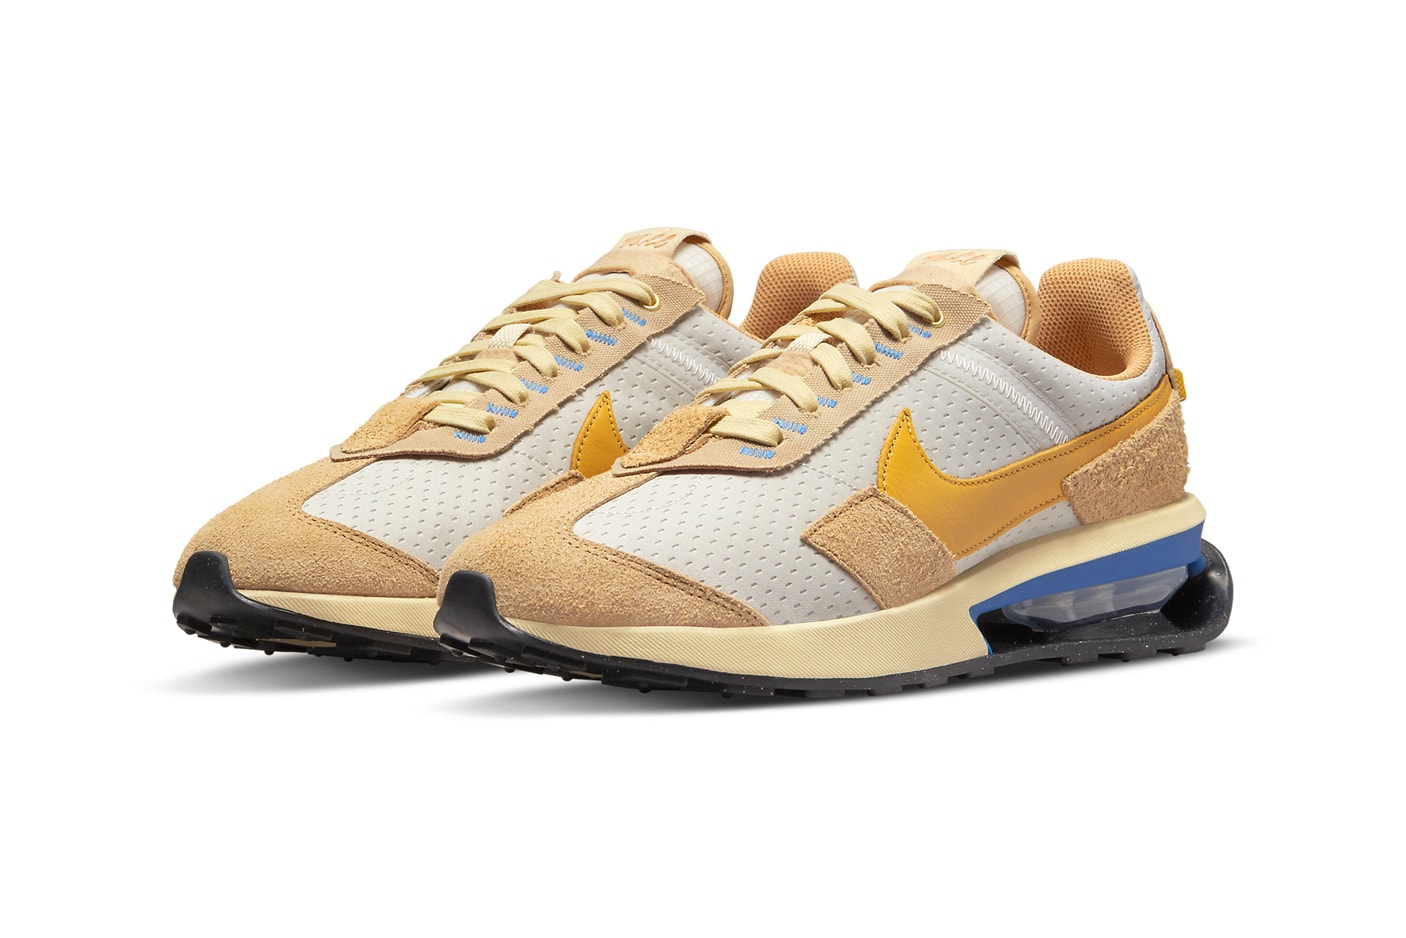 Nike Air Max Pre-Day Warm core Arrives in Jersey and Fleece suede wool jersey white blue yellow purple canvas release info news